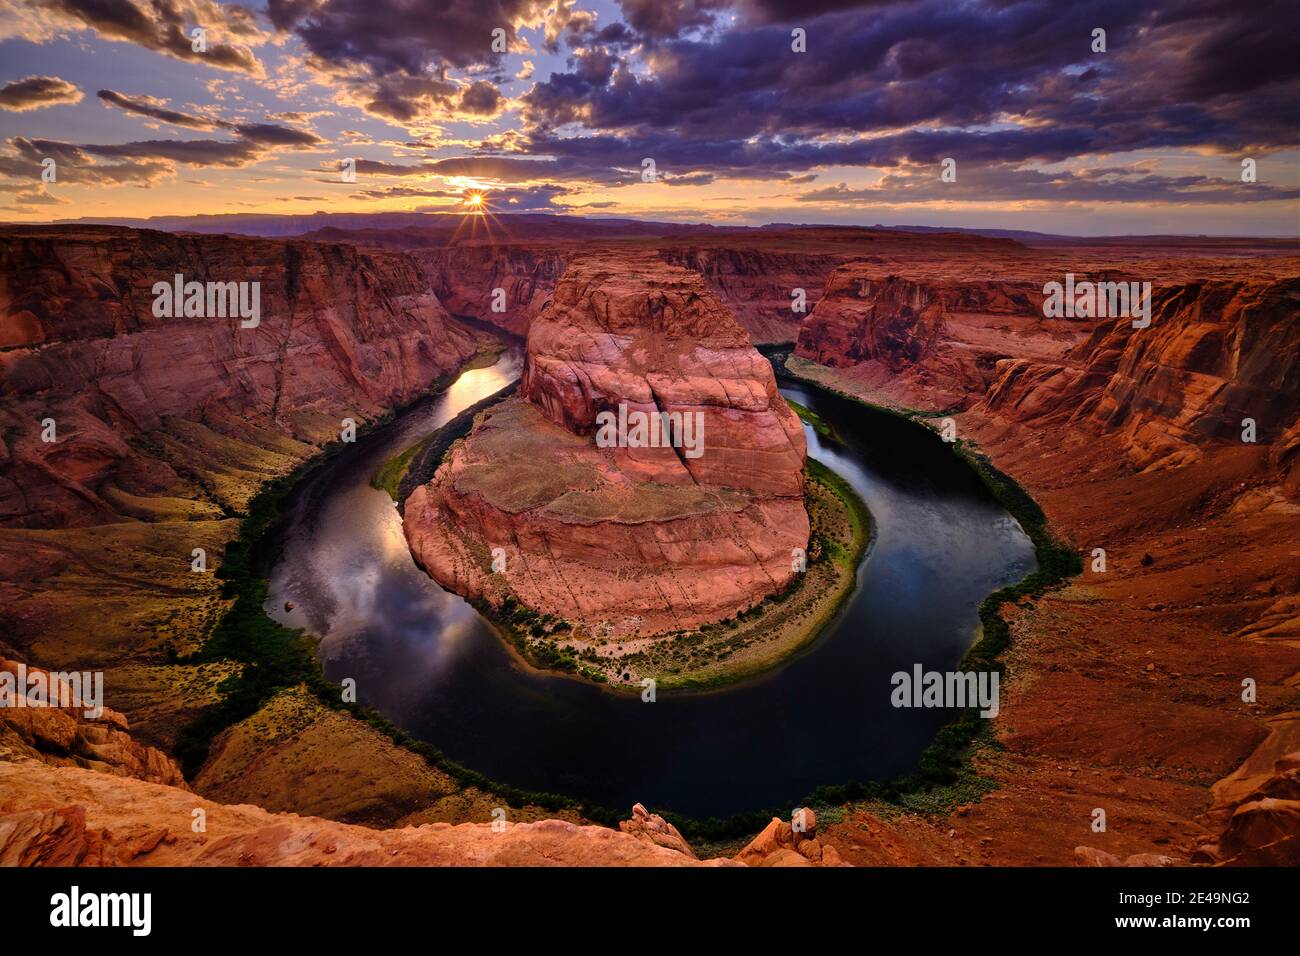 Grand Canyon Sunset High Resolution Stock Photography and Images - Alamy